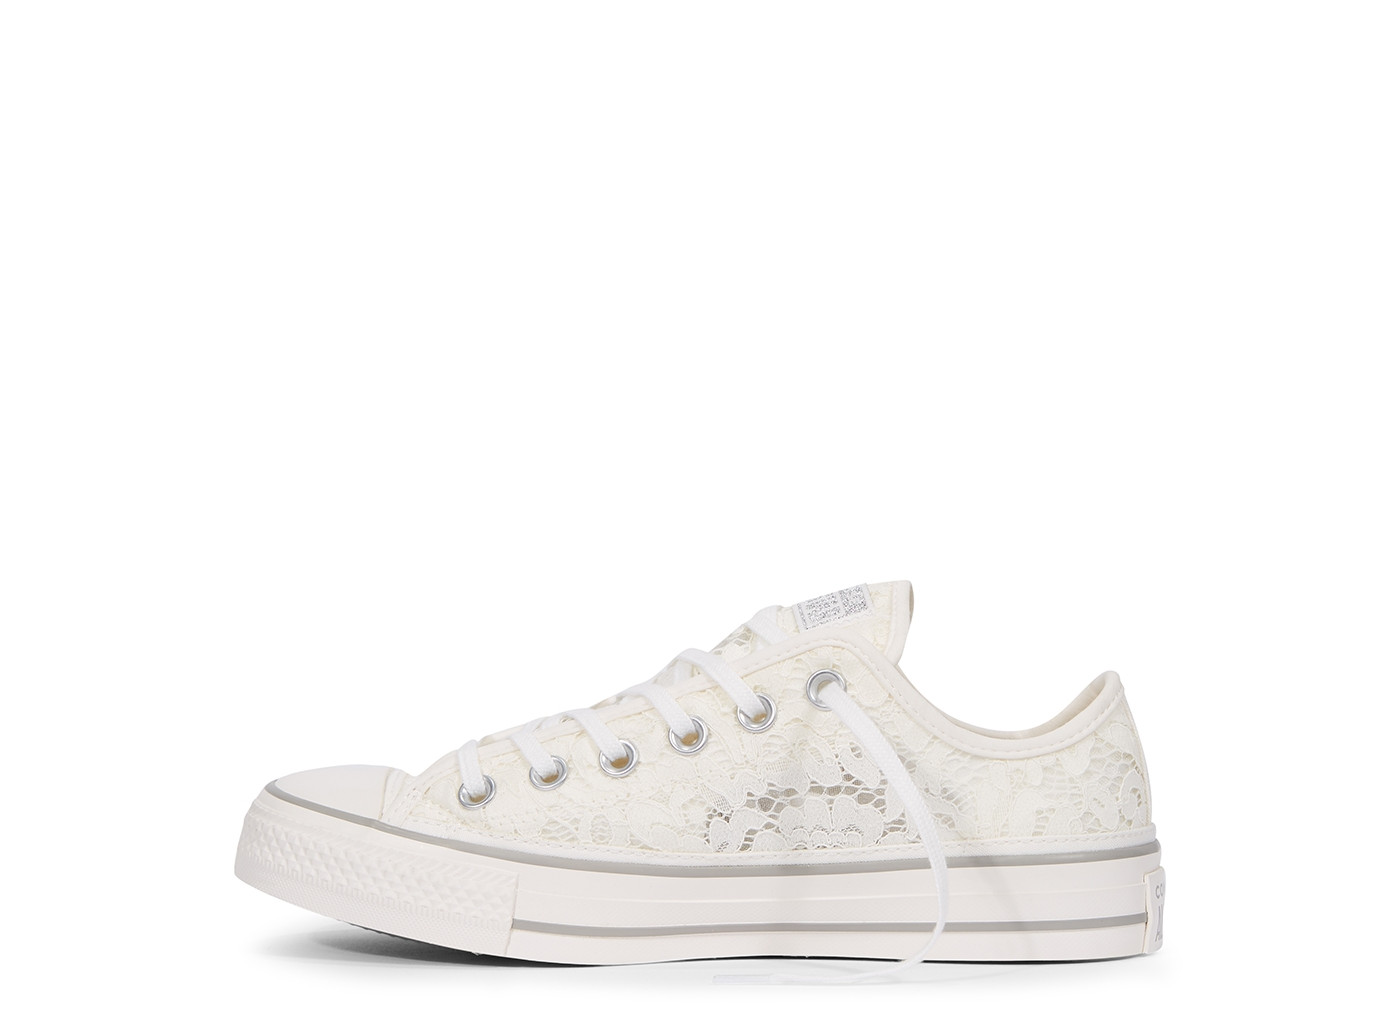 chuck taylor all star flower lace